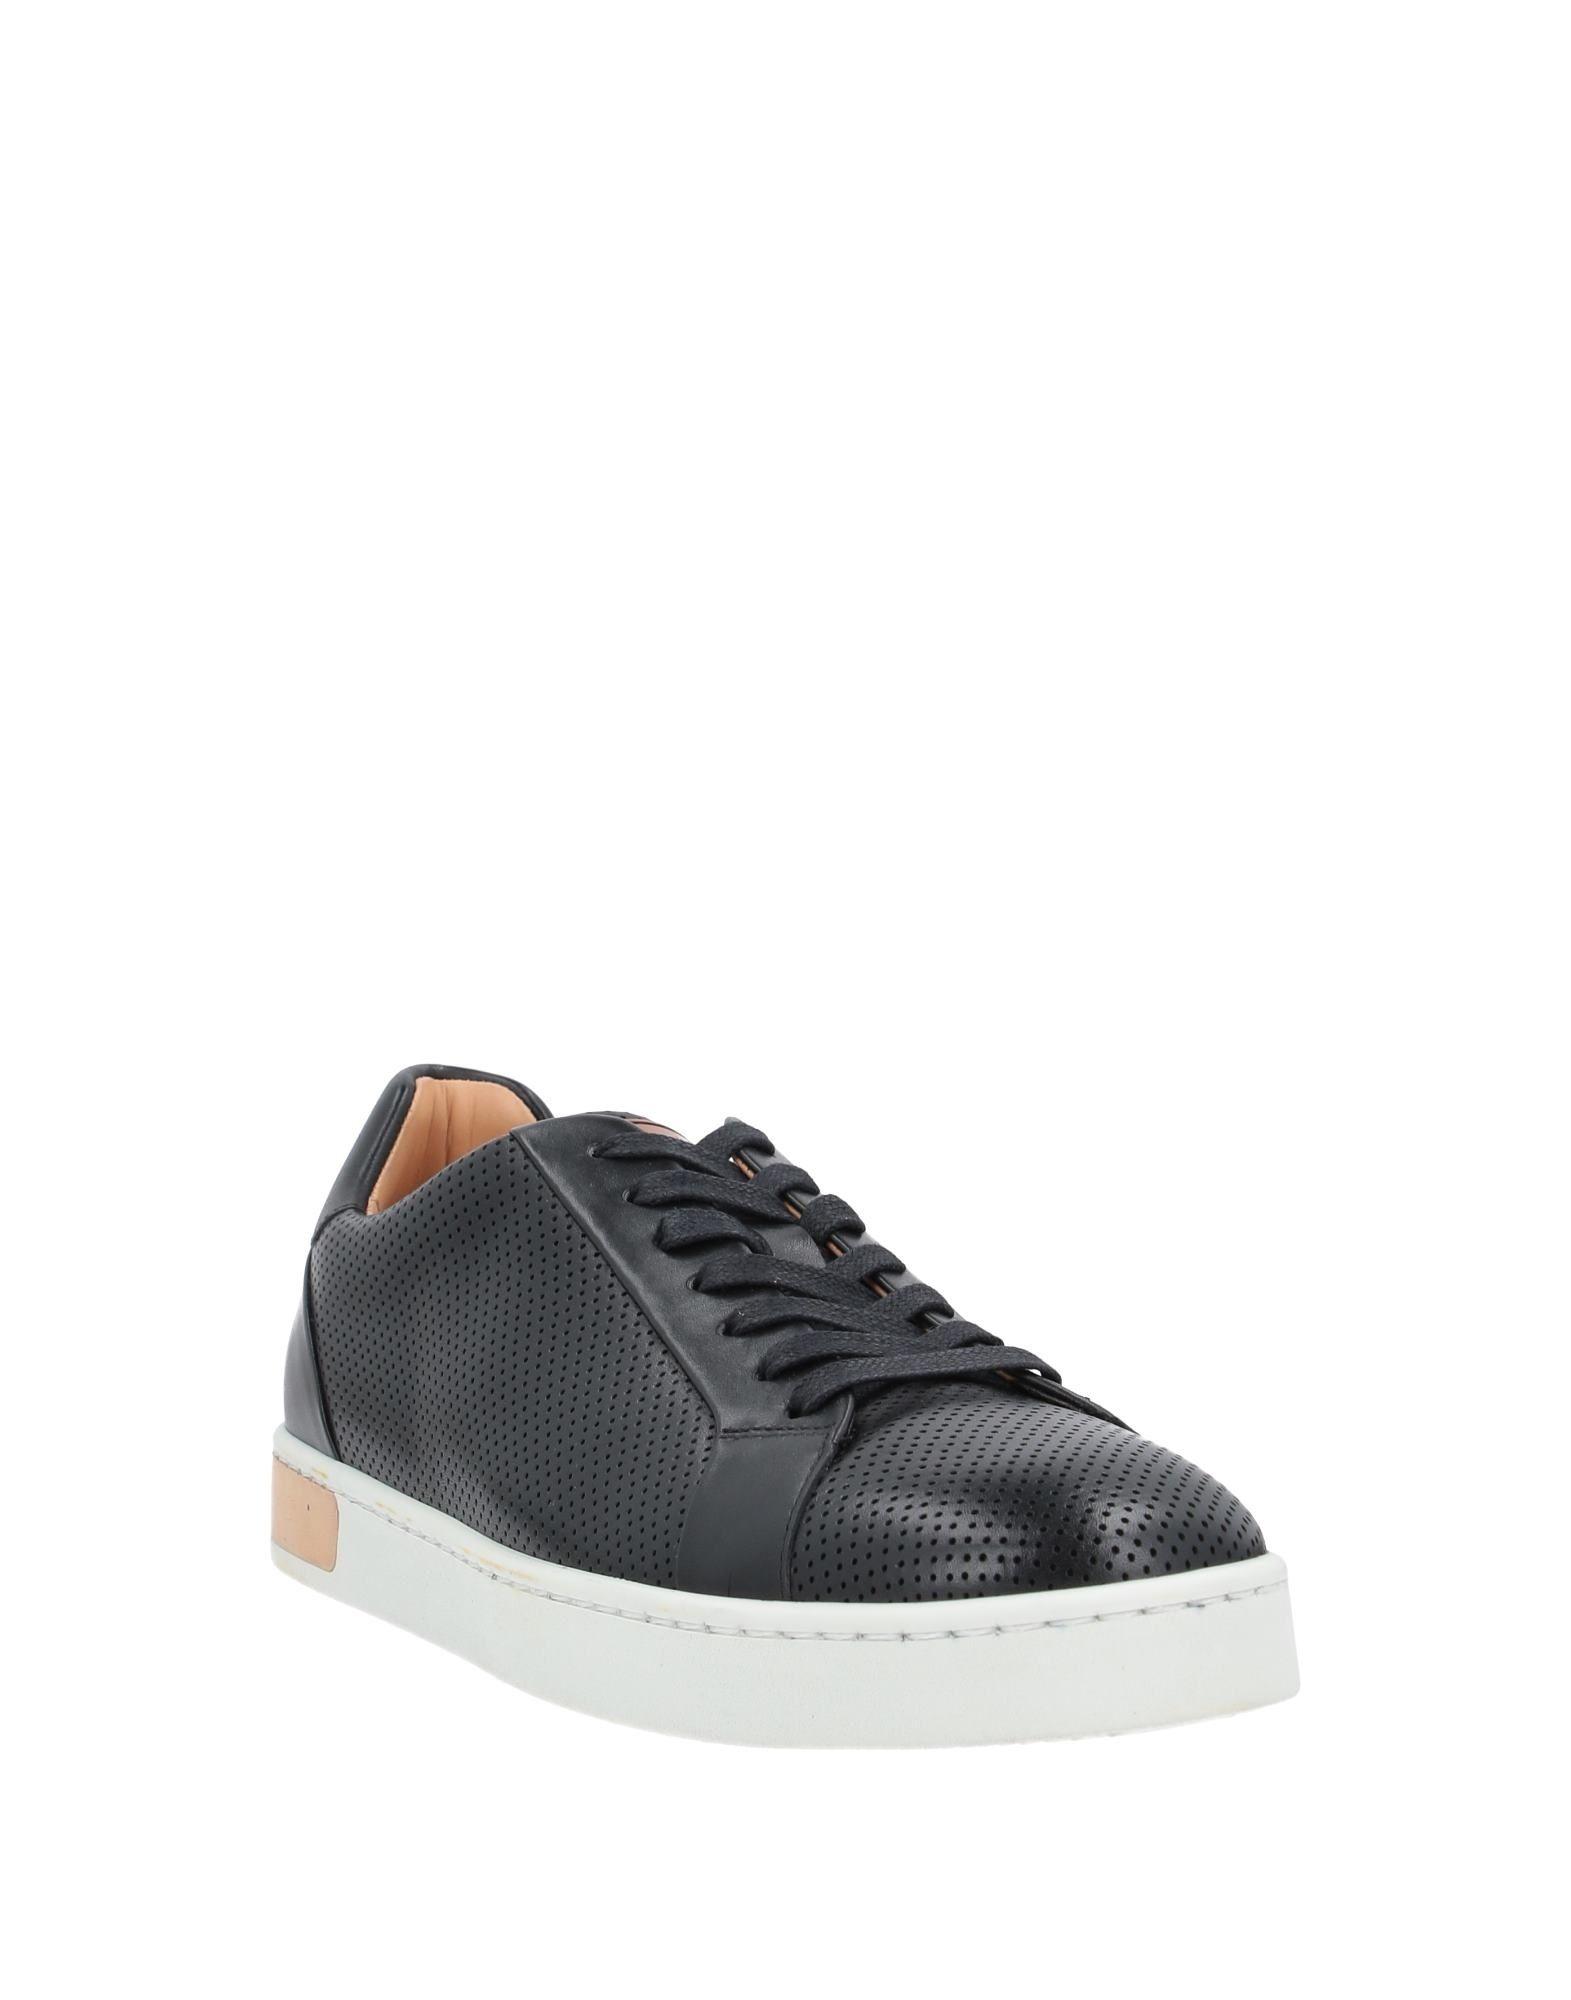 Magnanni Leather Low-tops & Sneakers in Black for Men - Lyst